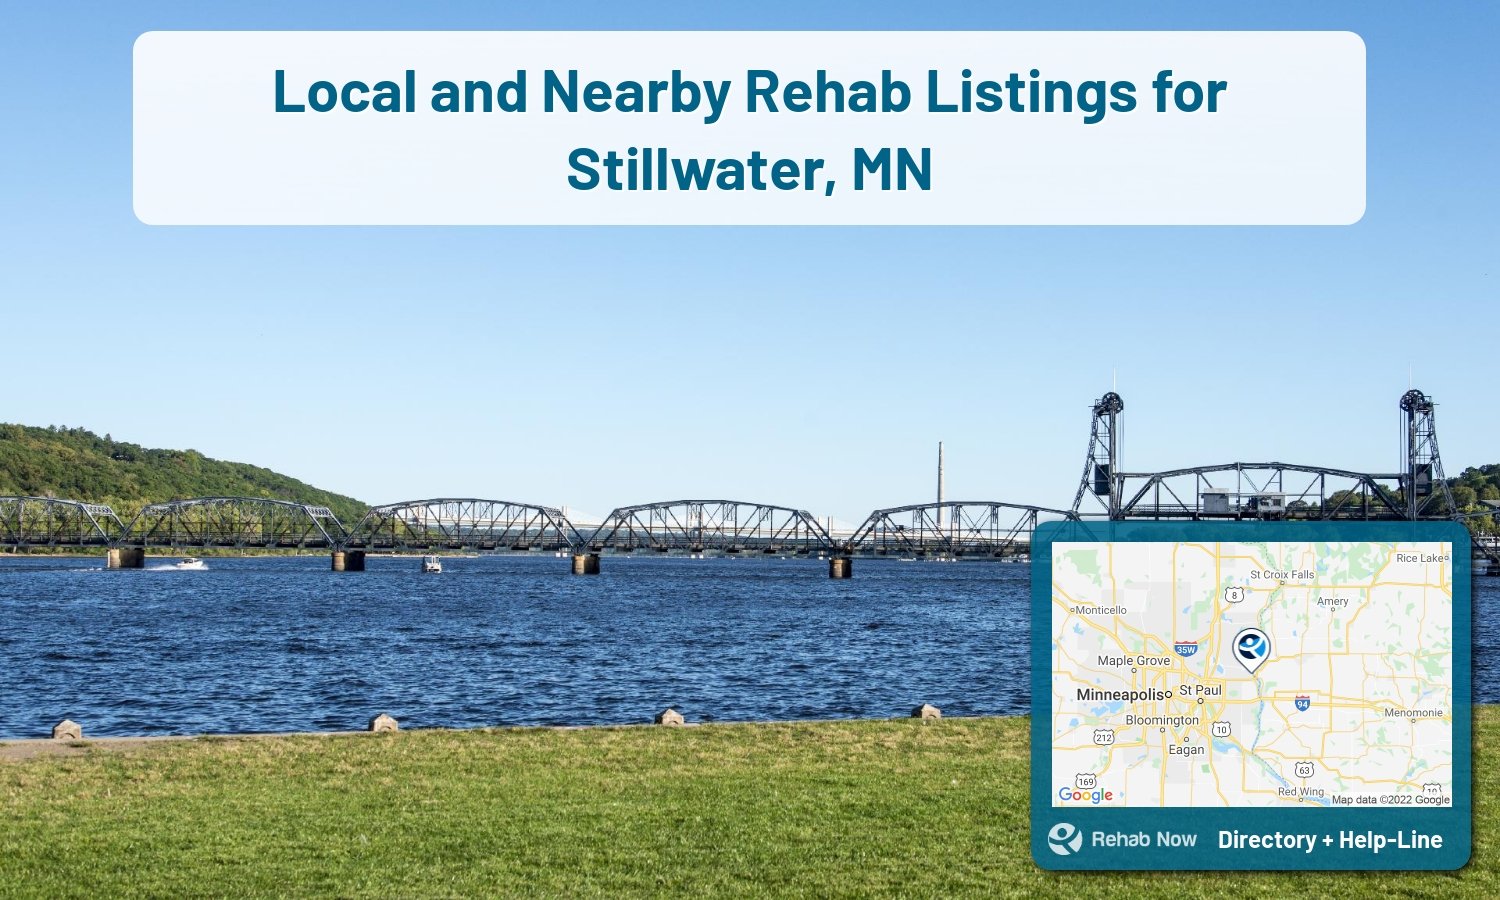 Stillwater, MN Treatment Centers. Find drug rehab in Stillwater, Minnesota, or detox and treatment programs. Get the right help now!